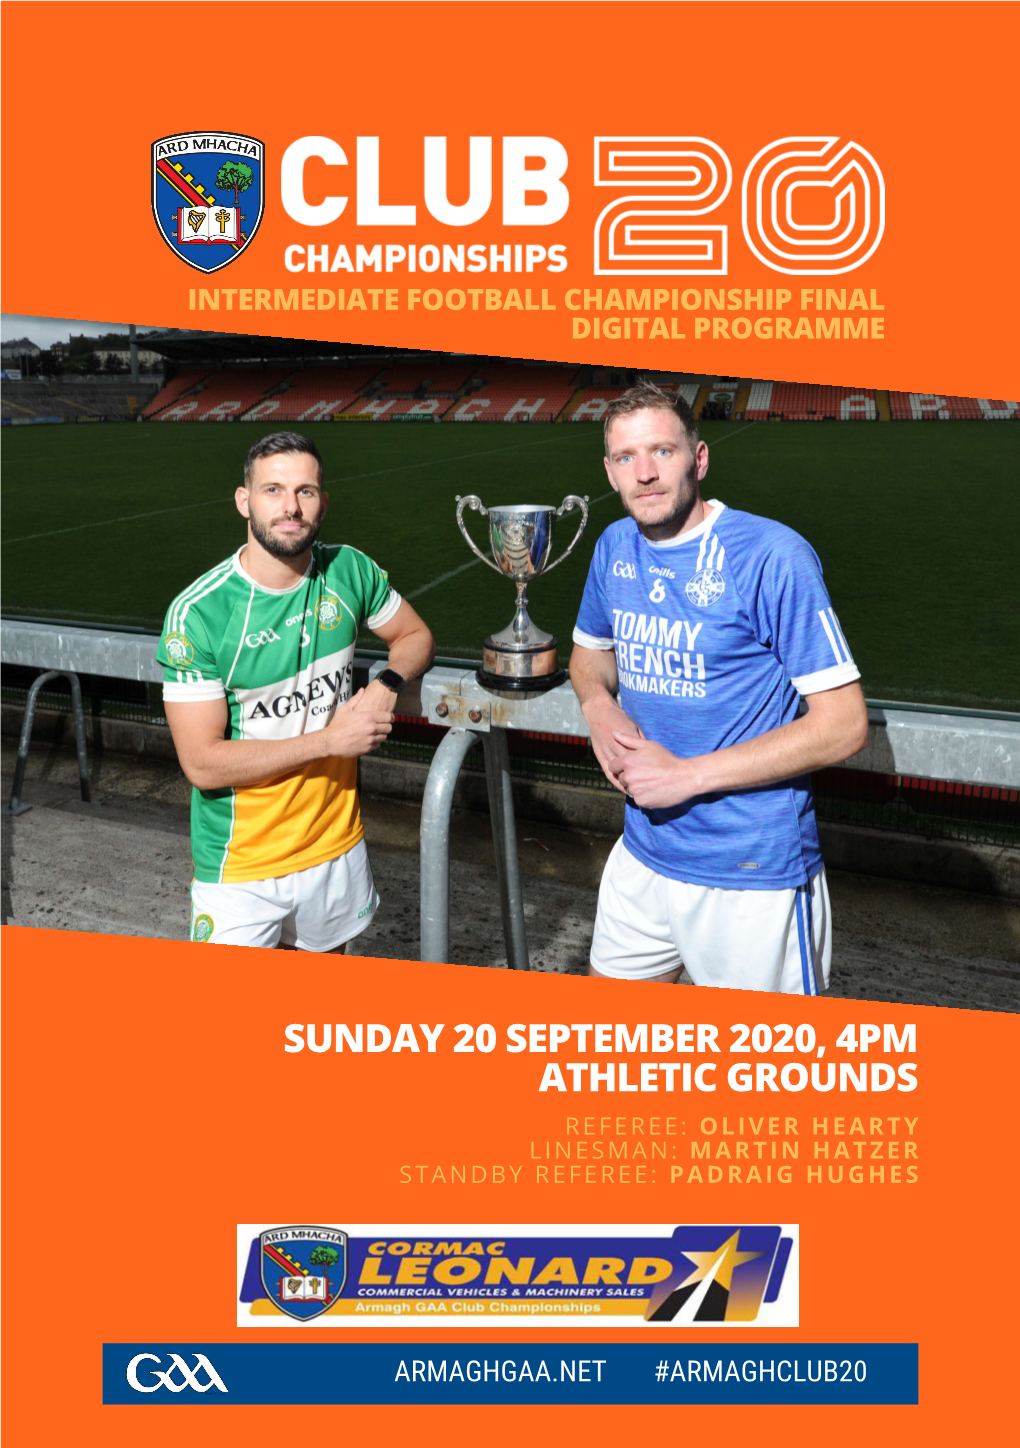 Sunday 20 September 2020, 4Pm Athletic Grounds Referee: Oliver Hearty Linesman: Martin Hatzer Standby Referee: Padraig Hughes